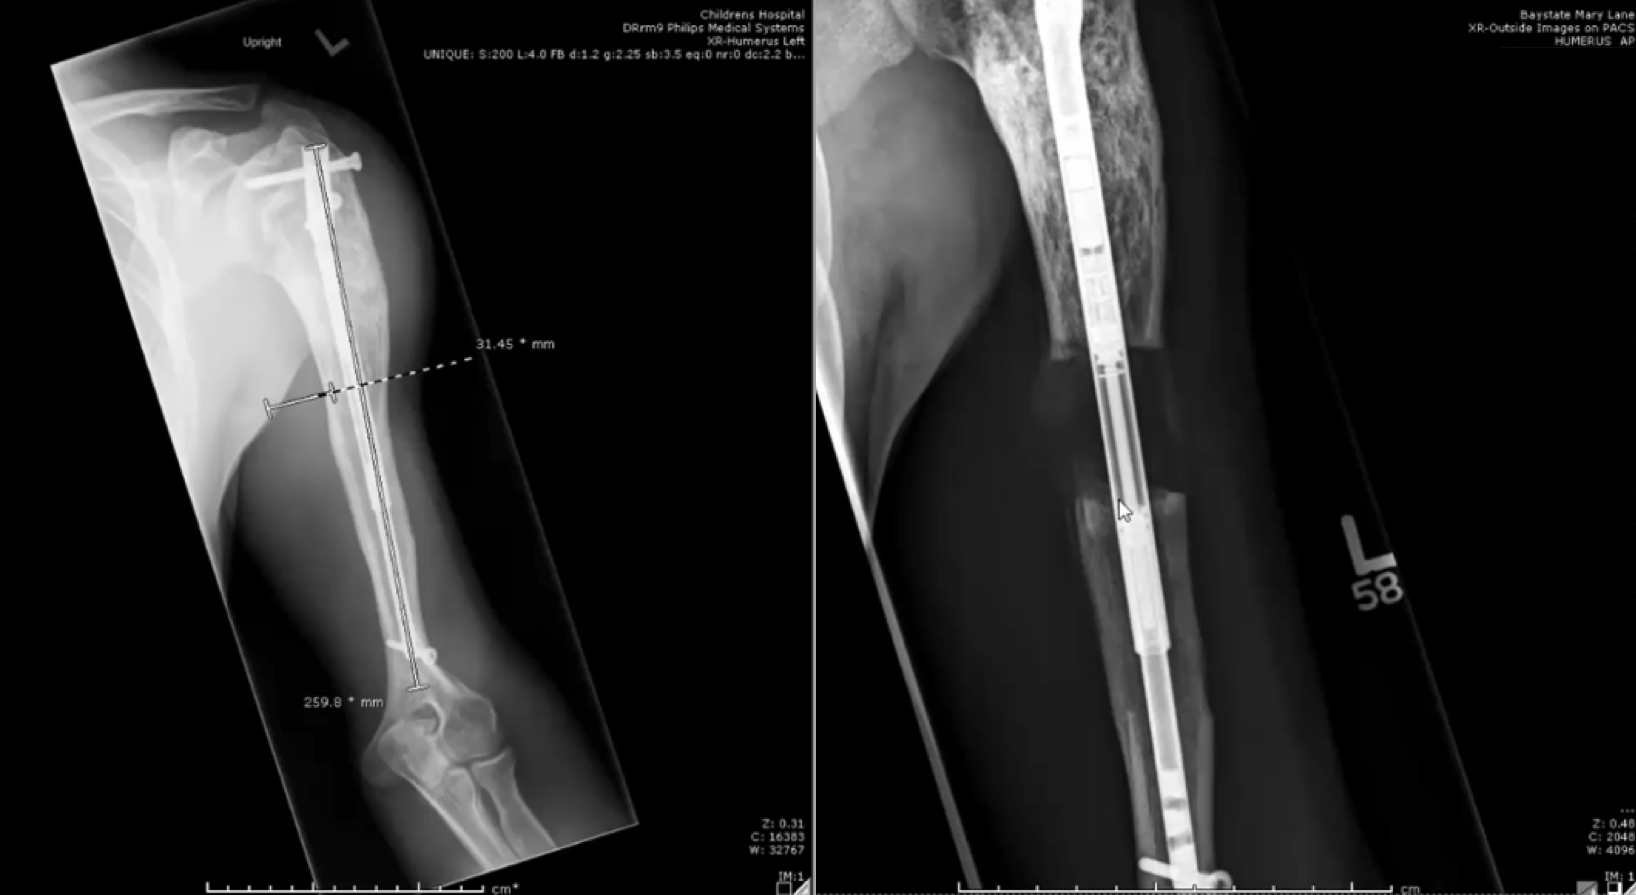 In June 2019, a PRECICE nail was inserted into the left humerus and lengthened by 5cm; in July 2020, the bone was lengthened another 5cm using a second PRECICE nail.